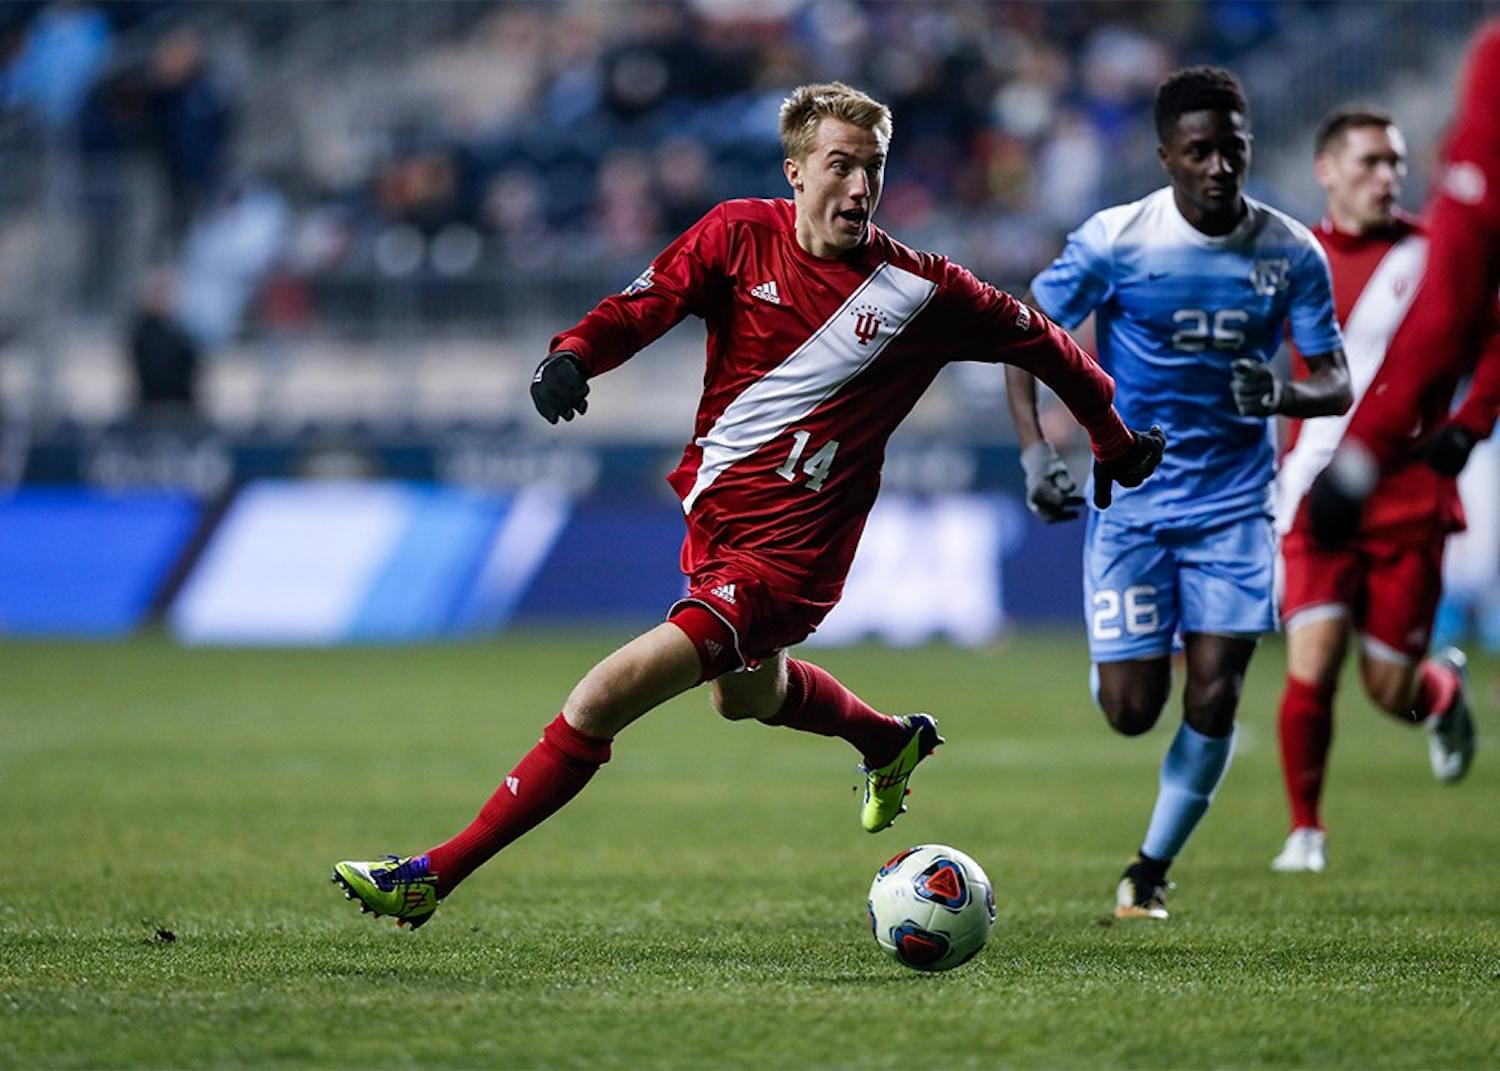 Then-freshman, now sophomore Griffin Dorsey looks to pass the ball to a teammate during the second half of the NCAA semifinal against North Carolina on Dec. 8, 2017 at Talen Energy Stadium in Philadelphia. Dorsey was named to the USA U-20 National Team.&nbsp;